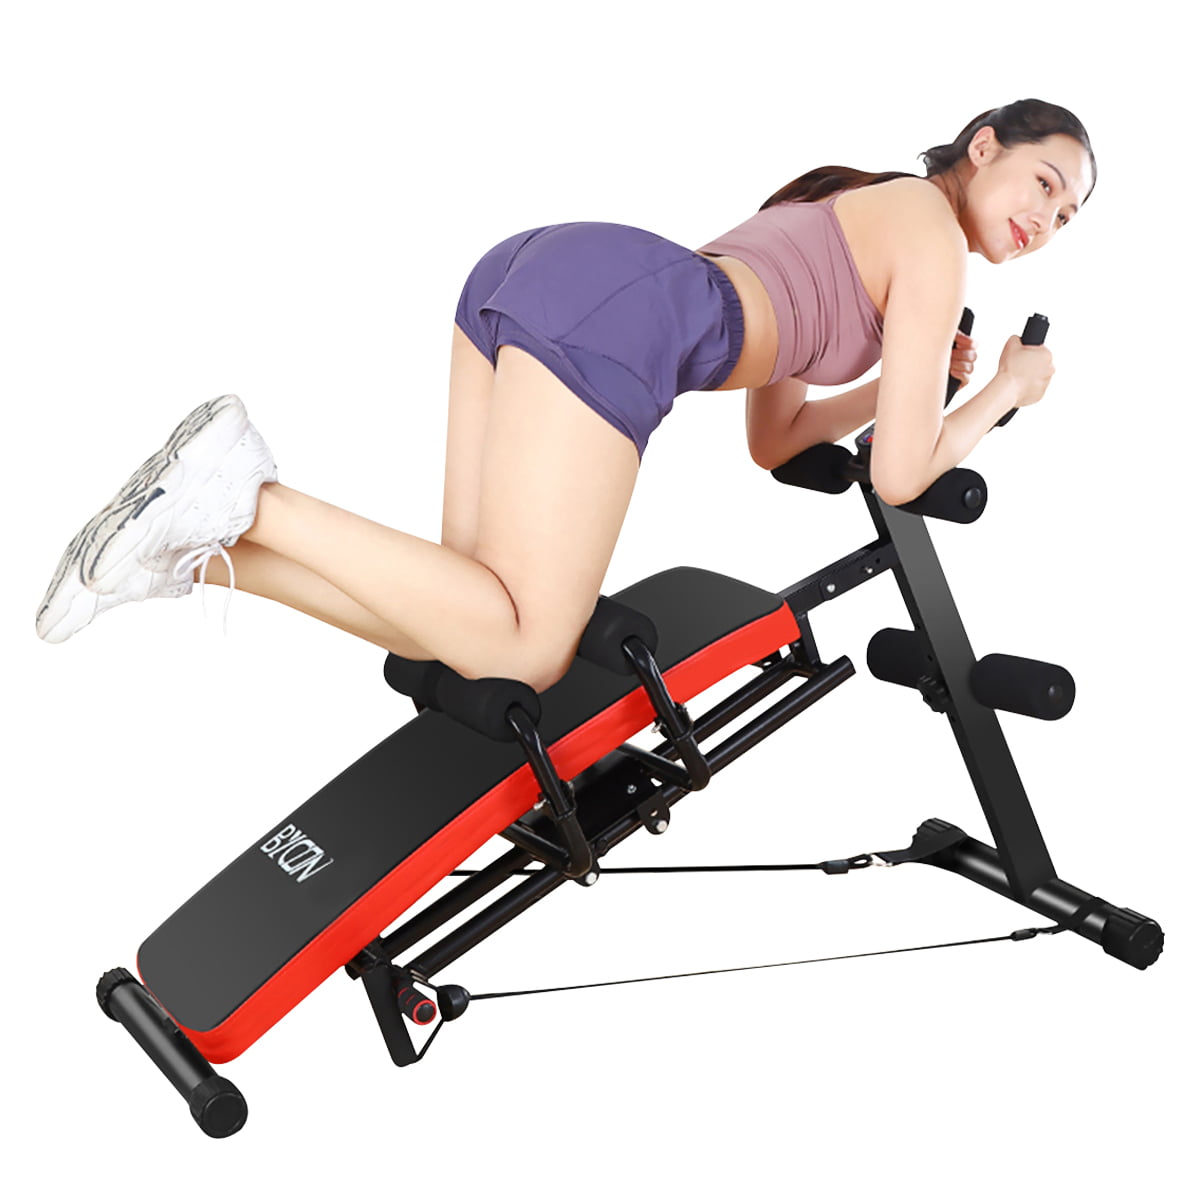 Details about   Sit Up Bench Decline Abdominal Fitness Home Gym Exercise Workout Equipment US 